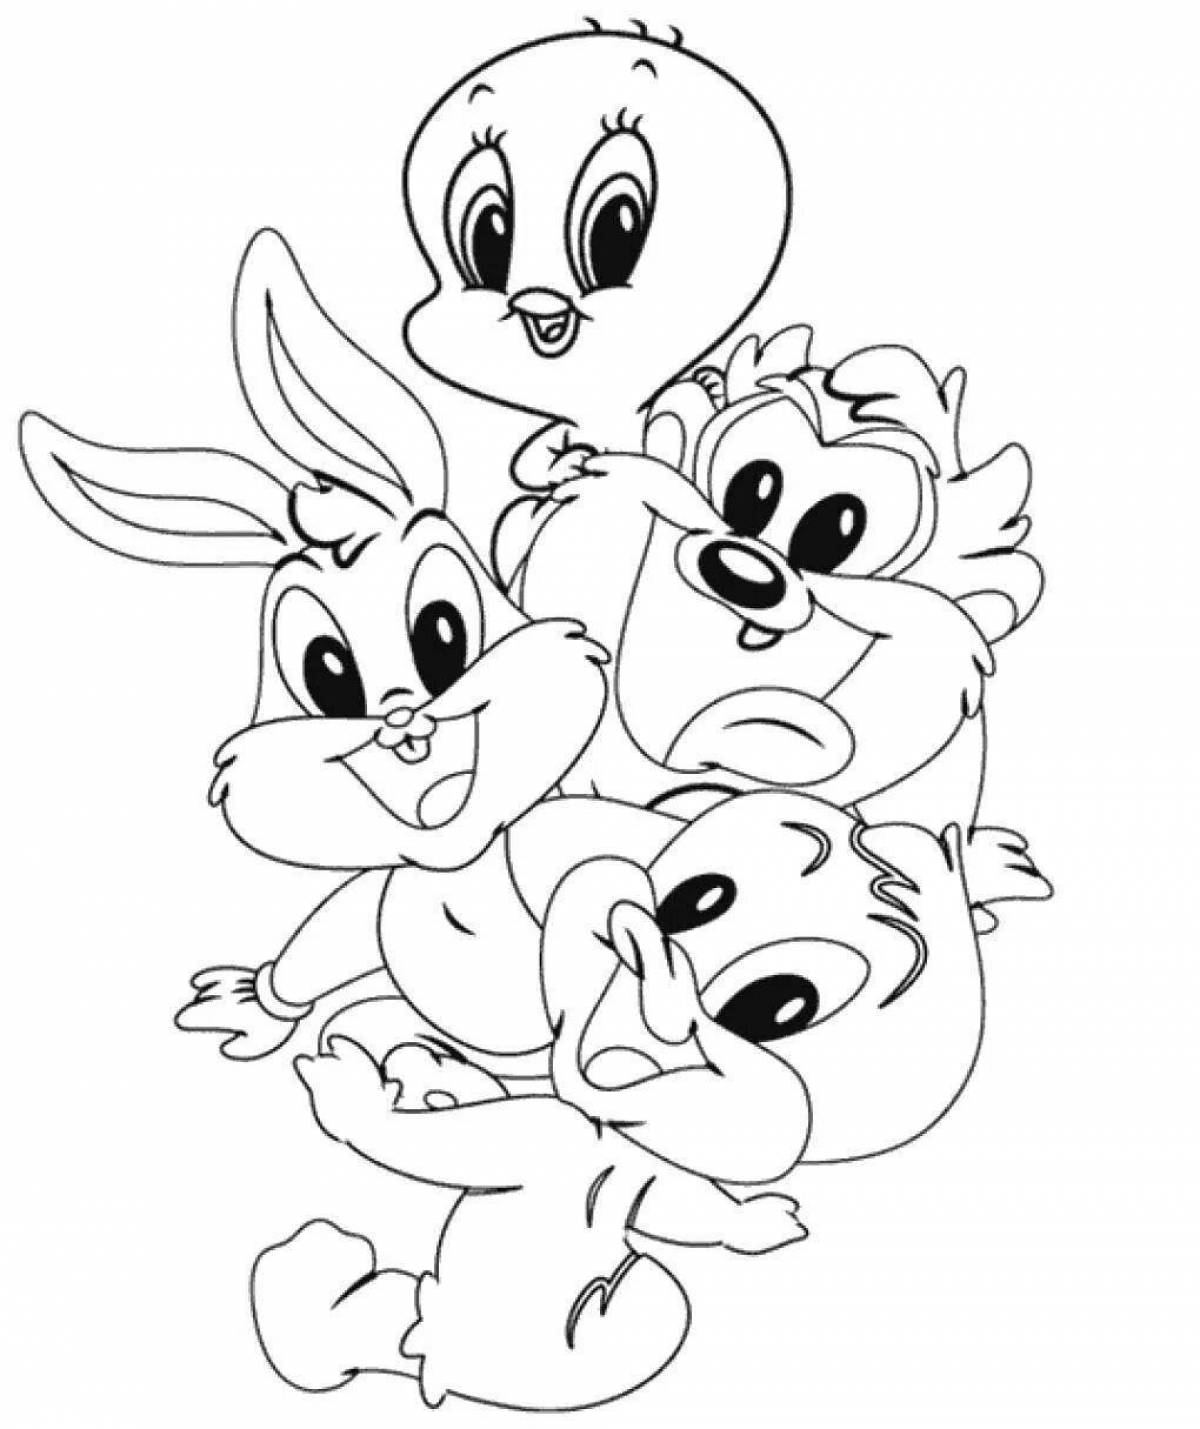 Adorable cartoon character coloring page